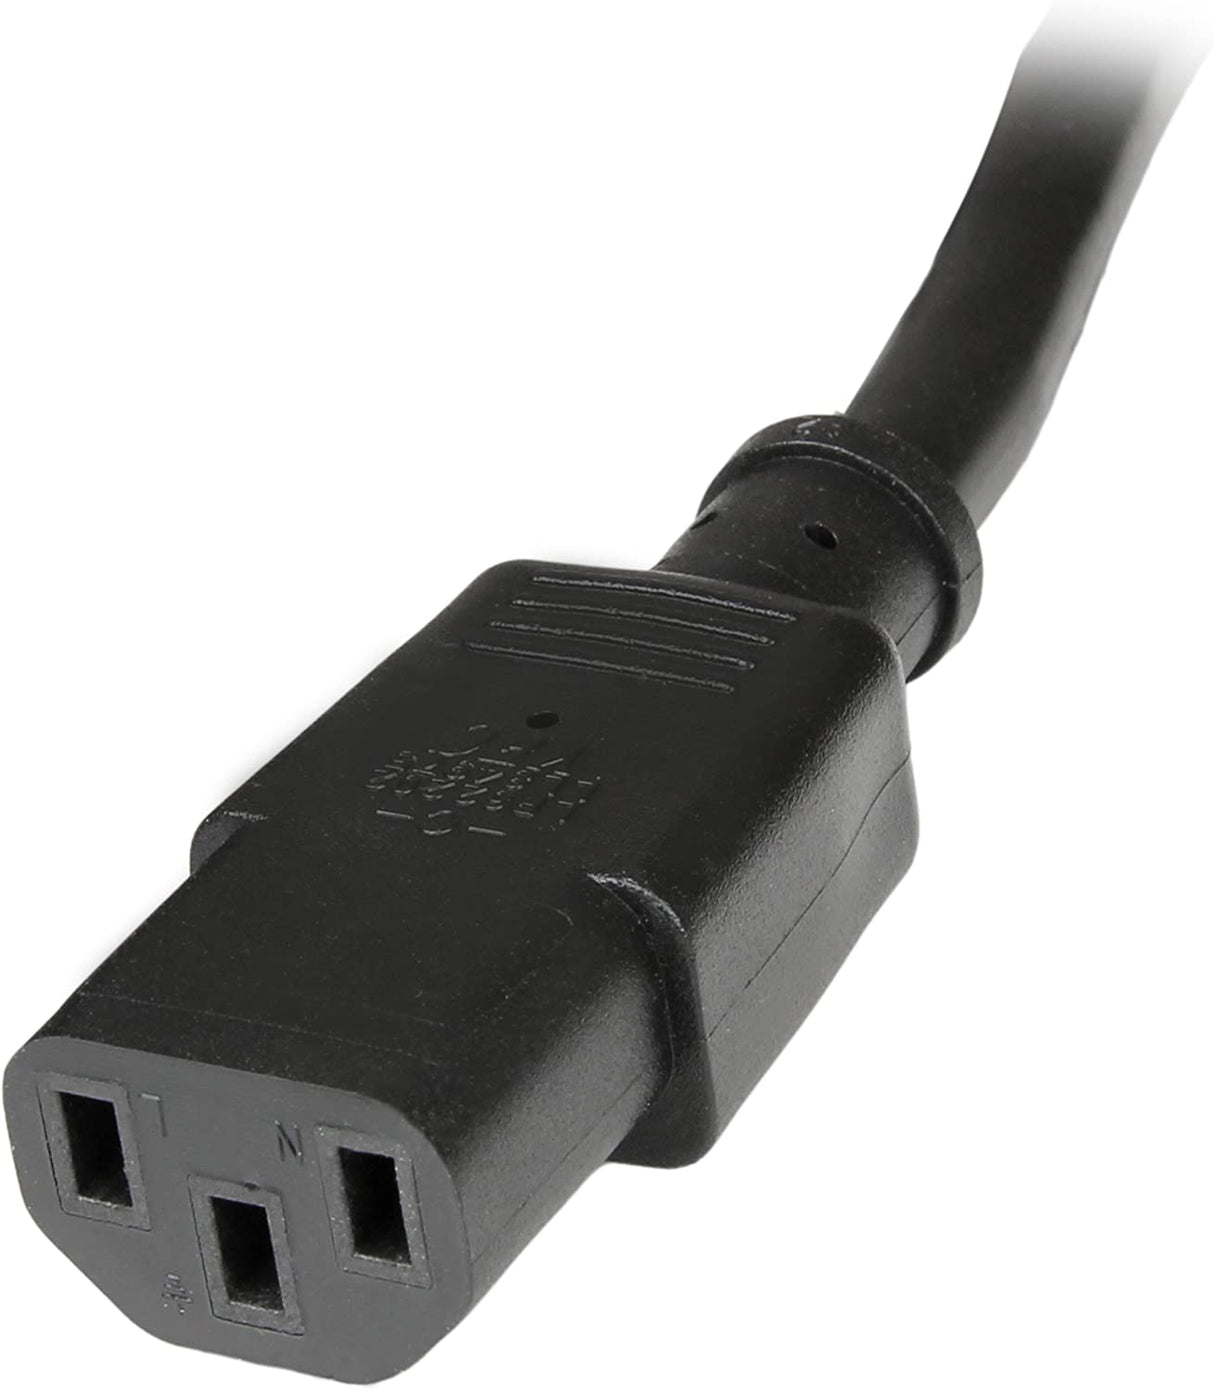 StarTech.com 3ft (1m) Heavy Duty Extension Cord, IEC 320 C14 to IEC 320 C13 Black Extension Cord, 15A 125V, 14AWG, Heavy Gauge Power Extension Cable, Heavy Duty AC Power Cord, UL Listed (PXT100143) 3 ft/1 m 14 AWG